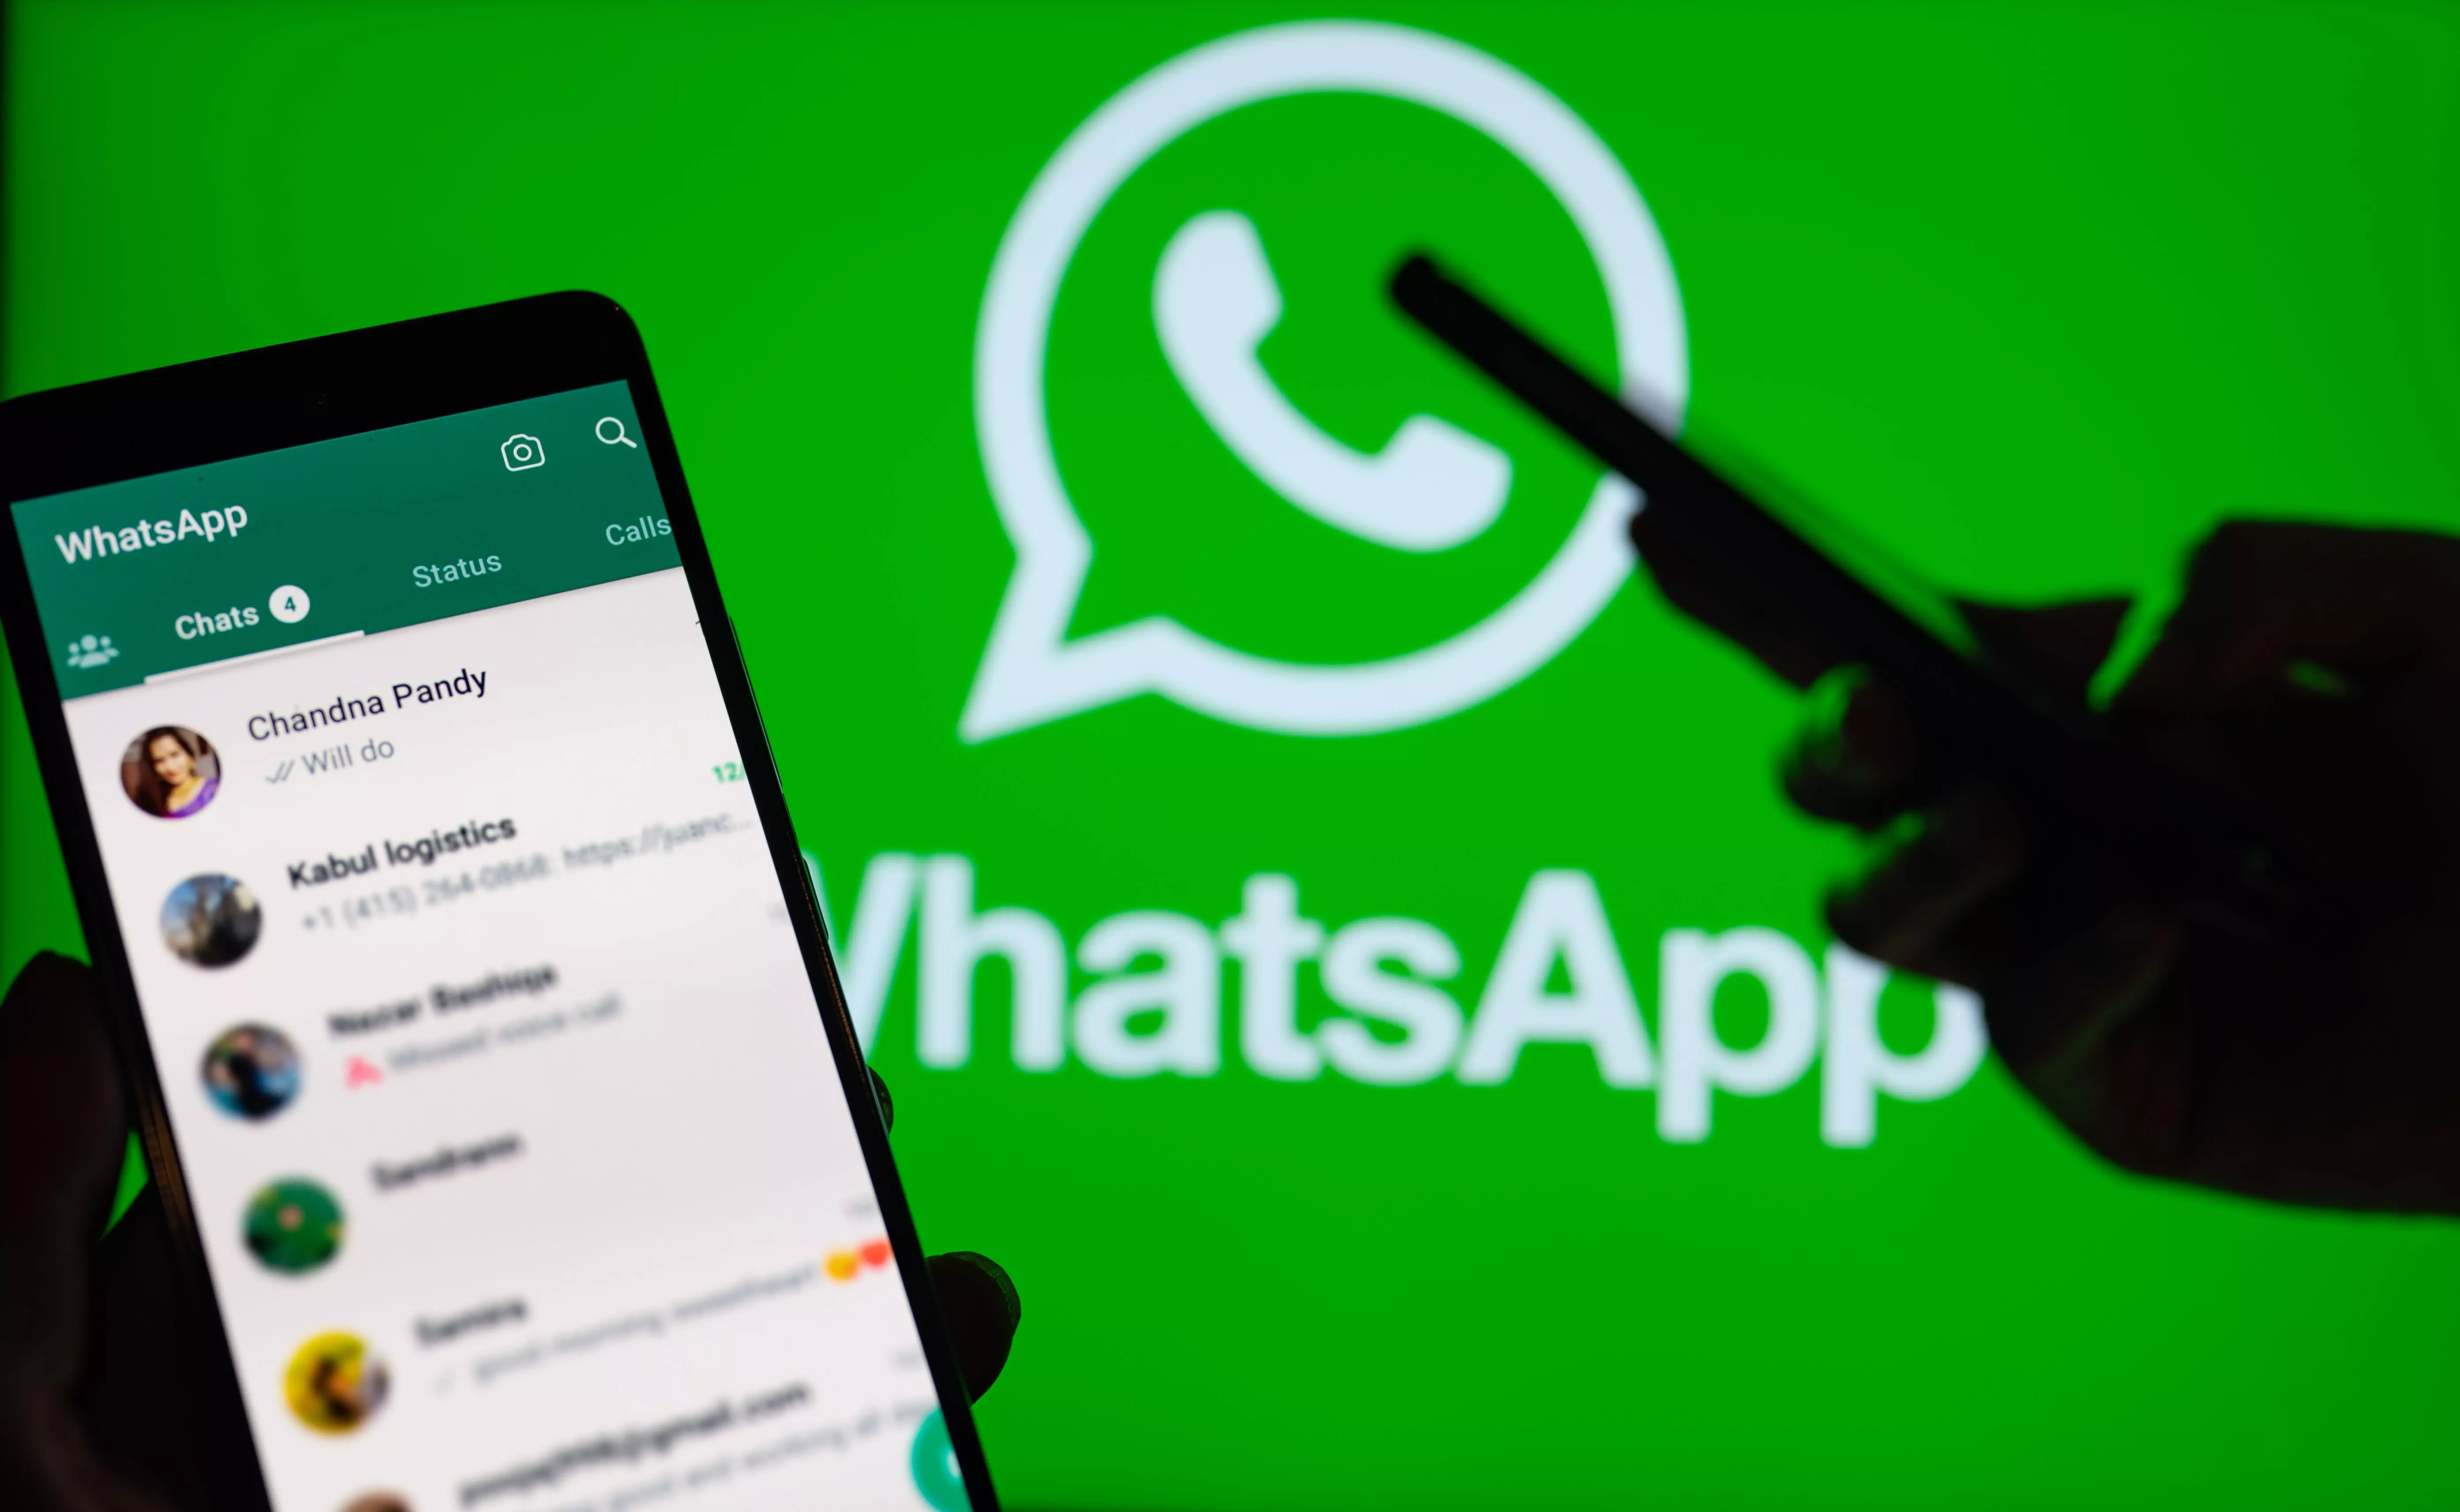 WhatsApp Beta Testing New Feature to React to Images and Videos with Emojis